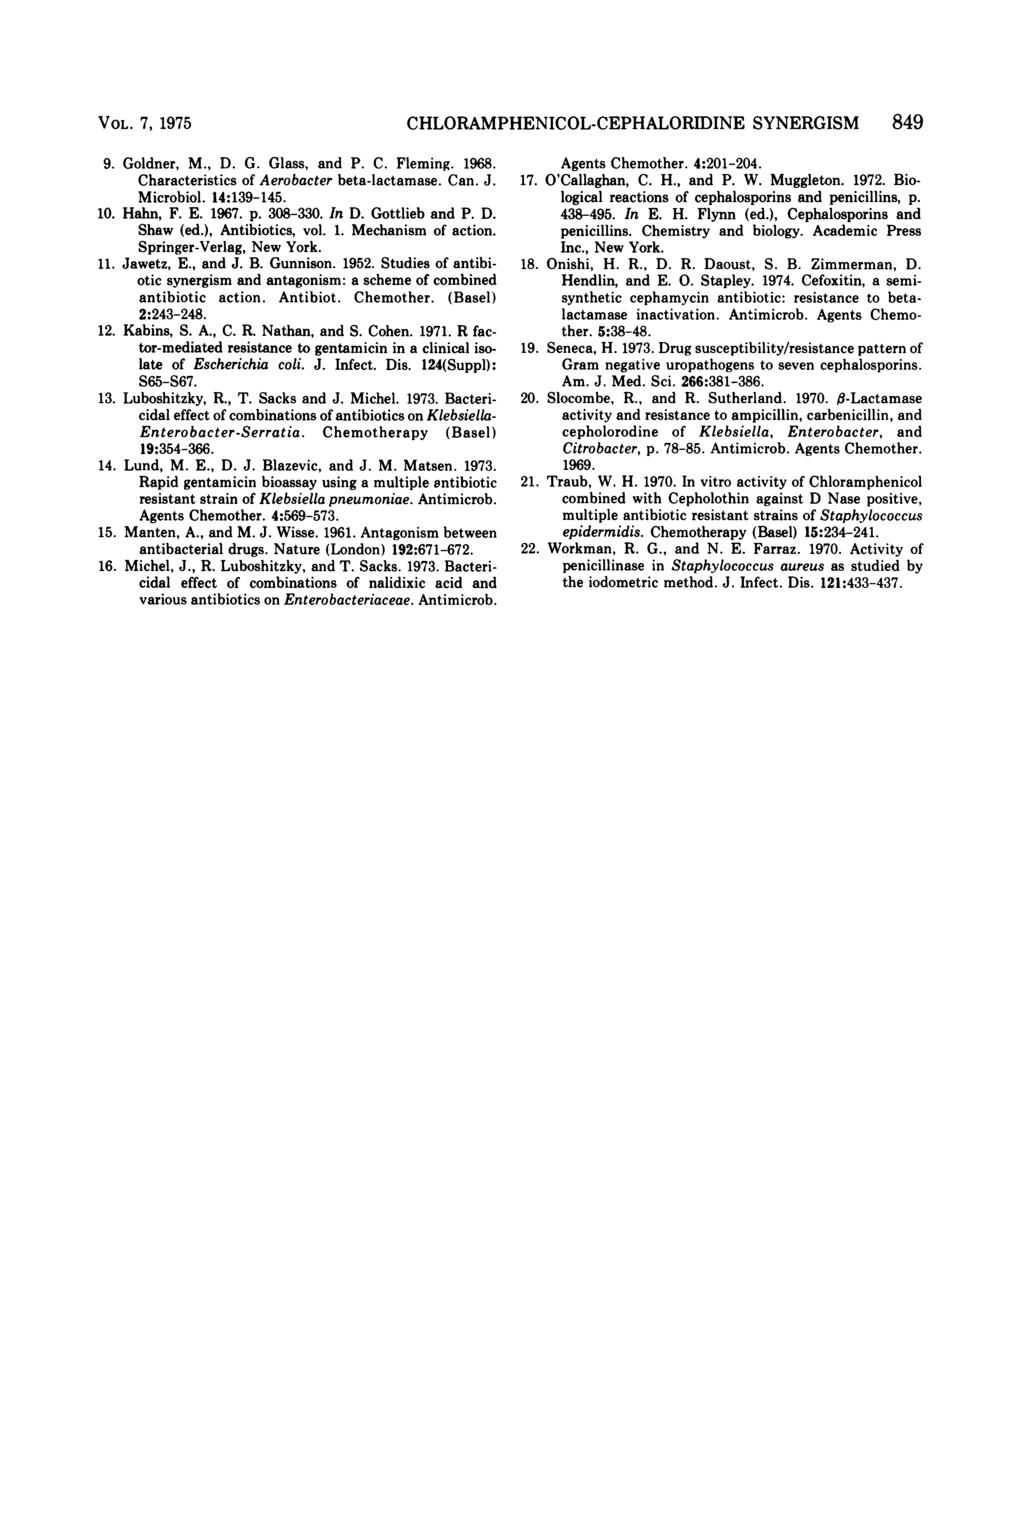 VOL. 7, 1975 CHLORAMPHENICOL-CEPHALORIDINE SYNERGISM 849 9. Goldner, M., D. G. Glass, and P. C. Fleming. 1968. Characteristics of Aerobacter beta-lactamase. Can. J. Microbiol. 14:139-145. 10. Hahn, F.